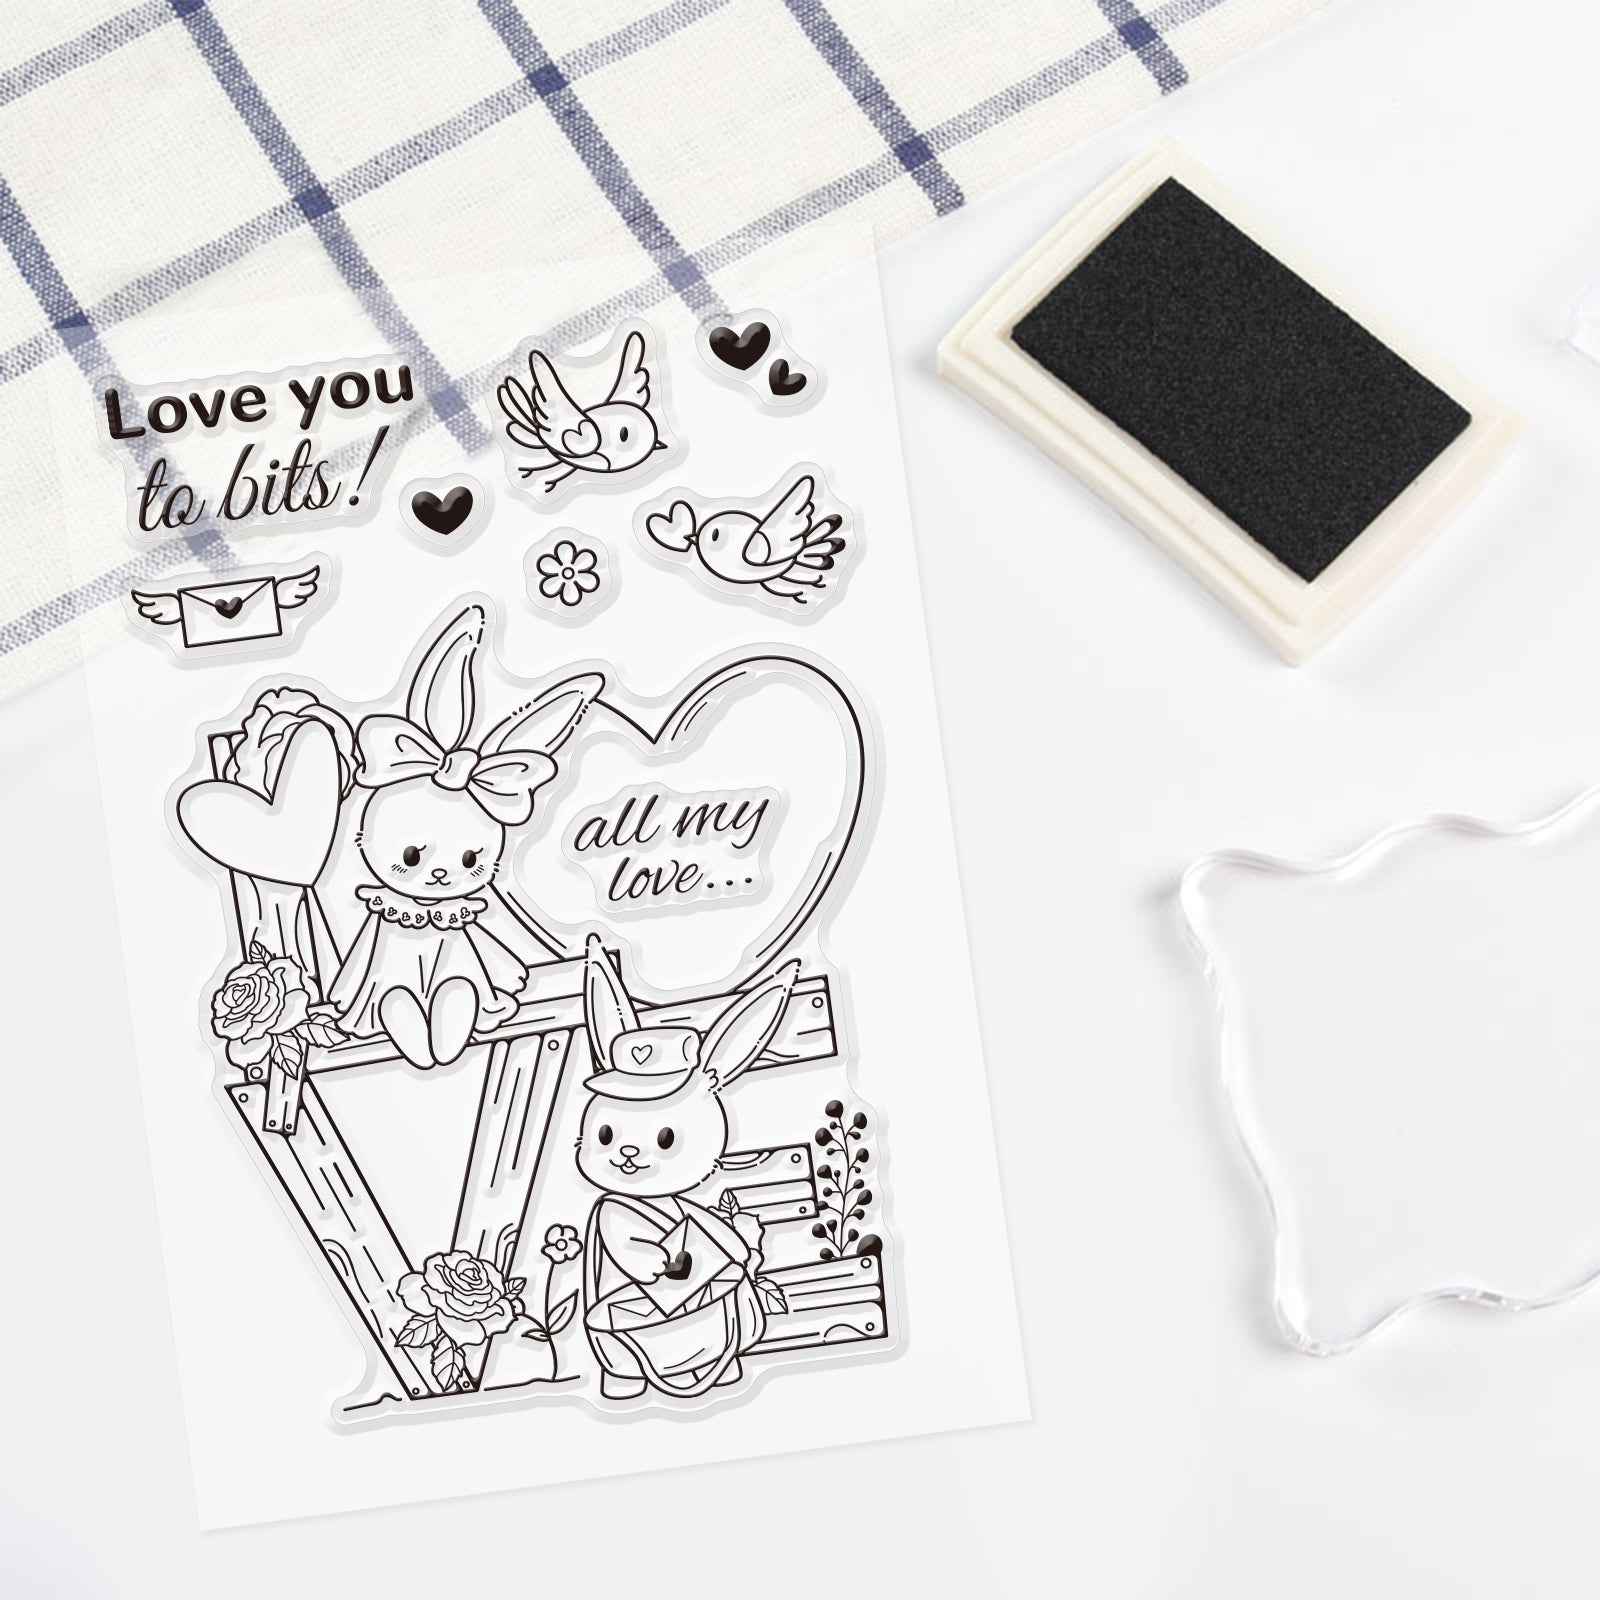 Globleland LOVE, Valentine's Day, Animals, Love, Rabbit Clear Silicone Stamp Seal for Card Making Decoration and DIY Scrapbooking